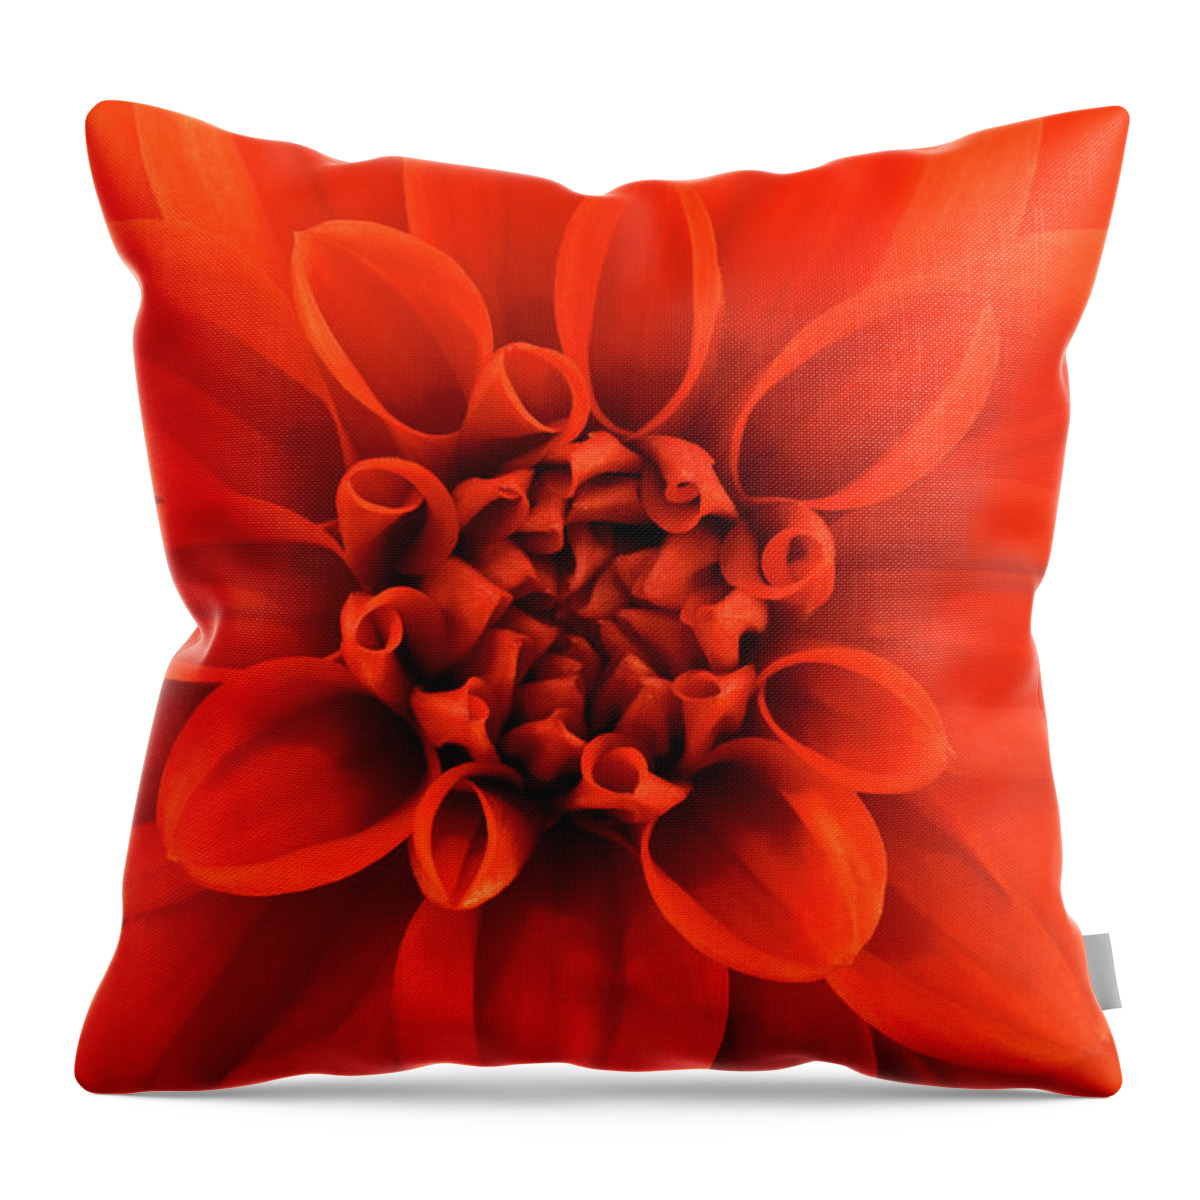 Orange Color Throw Pillow featuring the photograph Close Up View Of An Orange Dahlia by Mike Hill